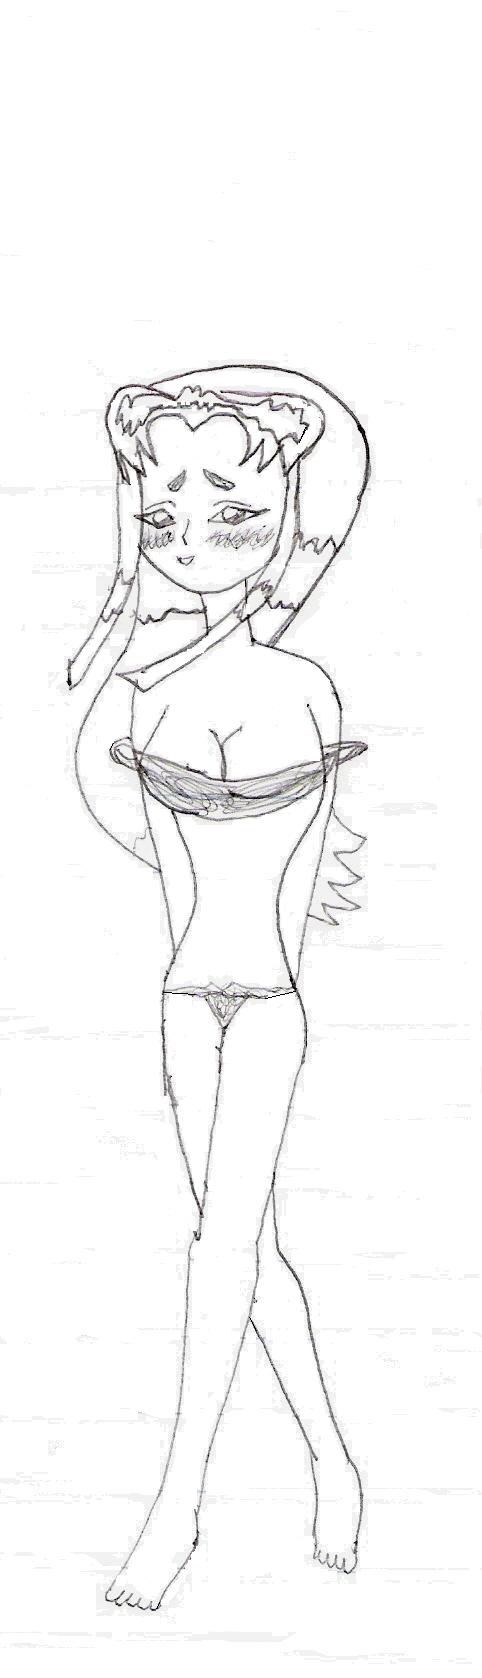 Naked Blackfire(uncolored) by Firey